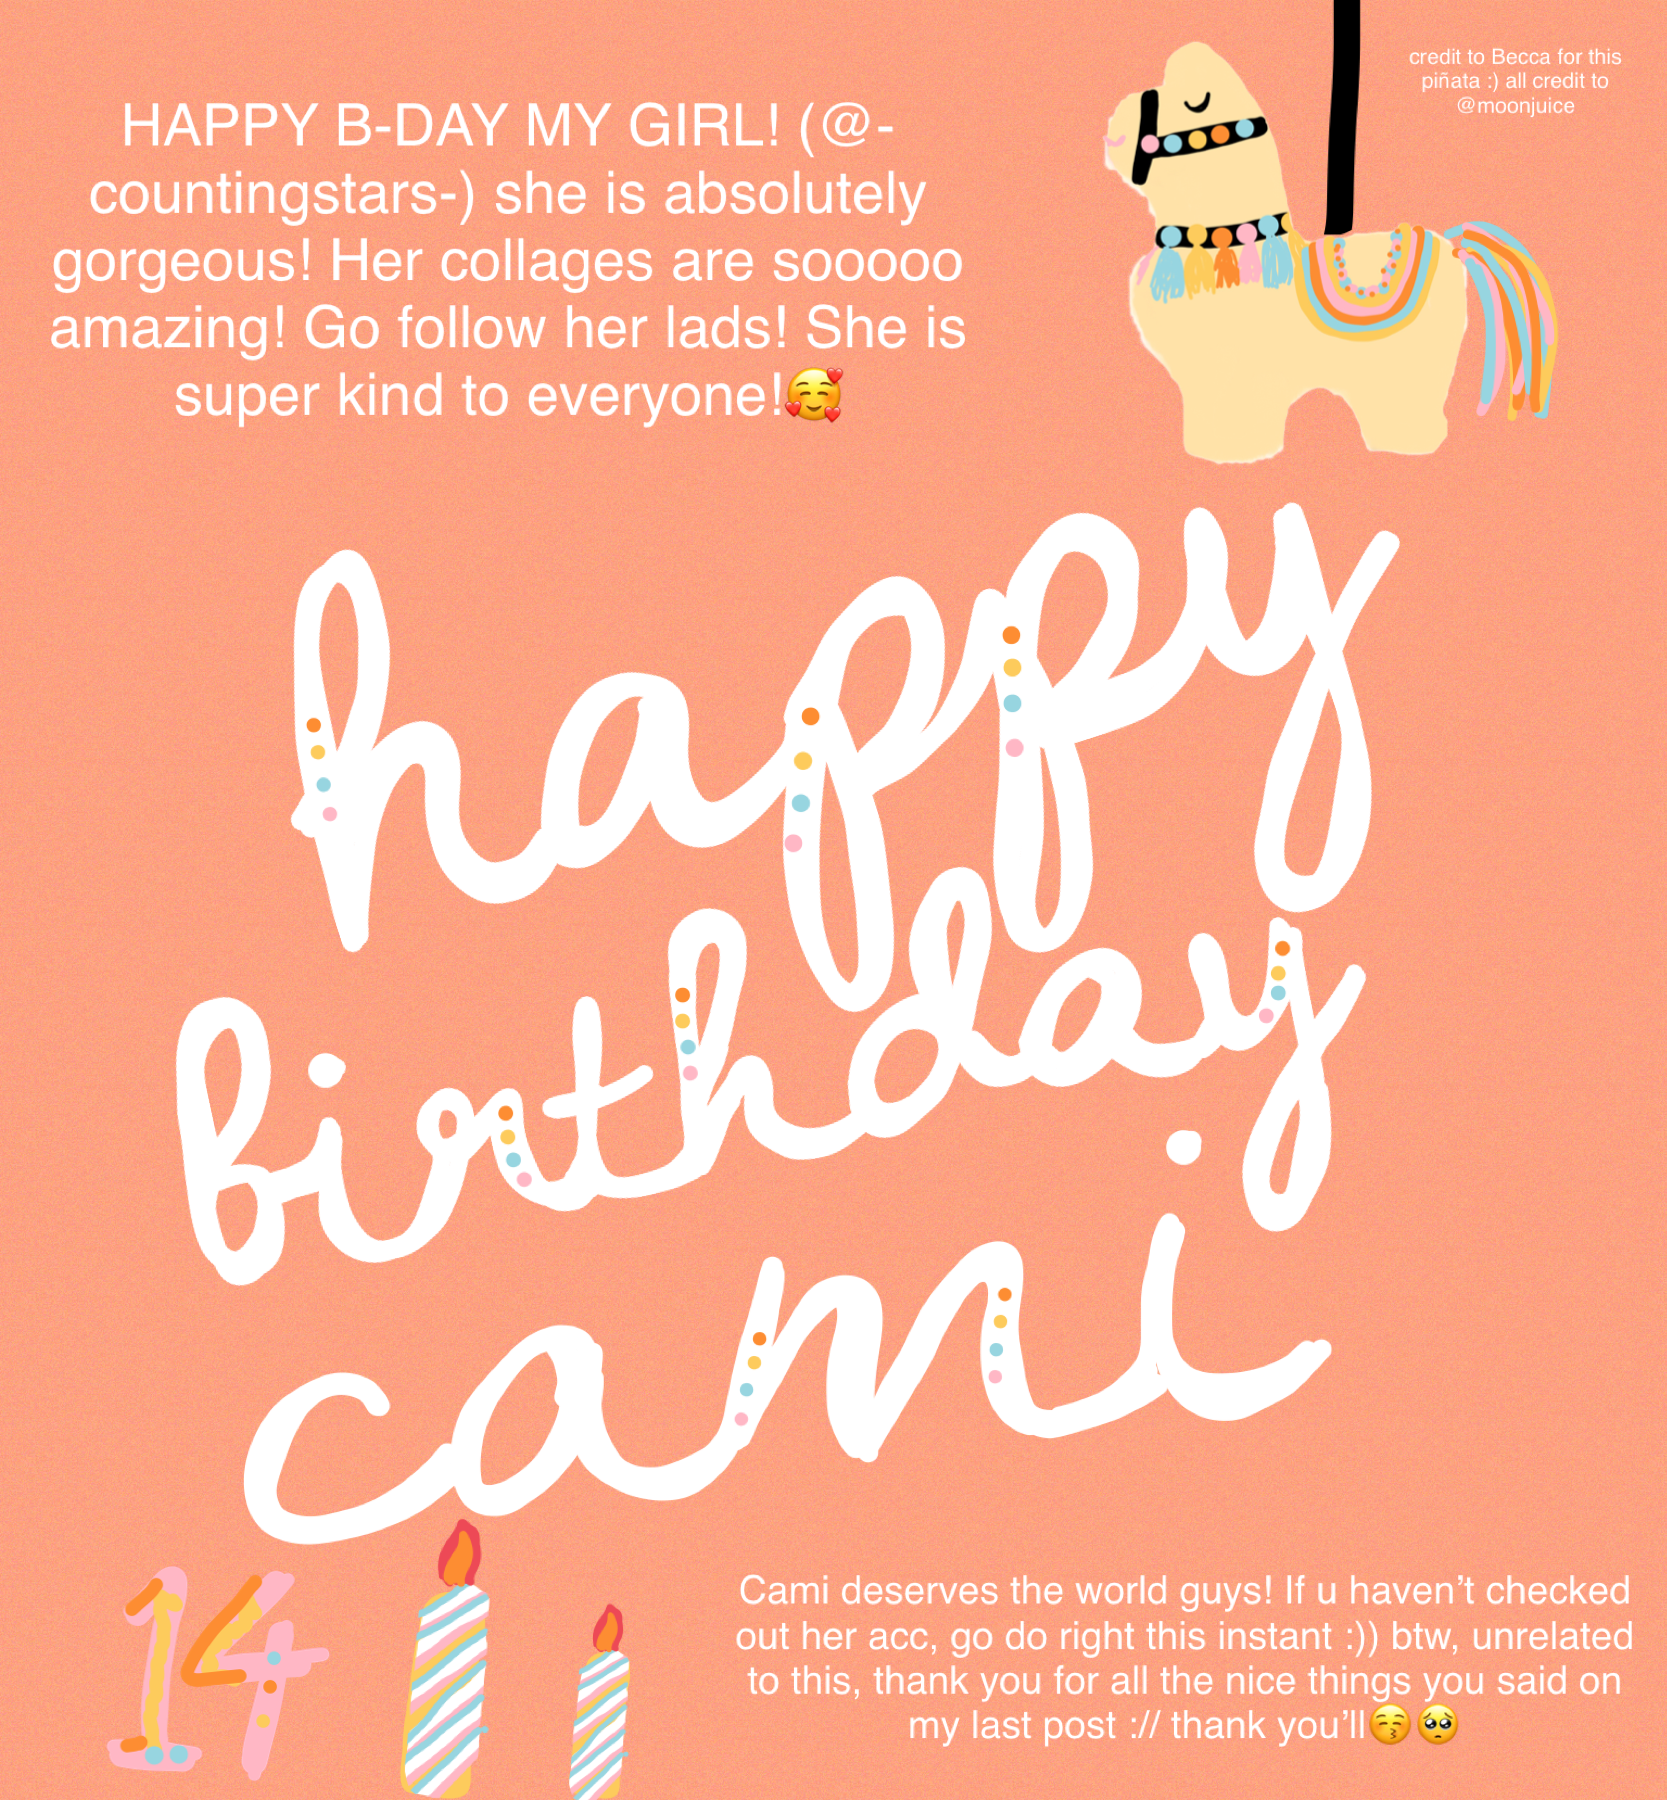 HAPPY B-DAY CAMI (tap)

You are my everything cami! You have been so nice to me all along! Thank you ami and happy b-day! Credit to @moonjuice aka Becca 